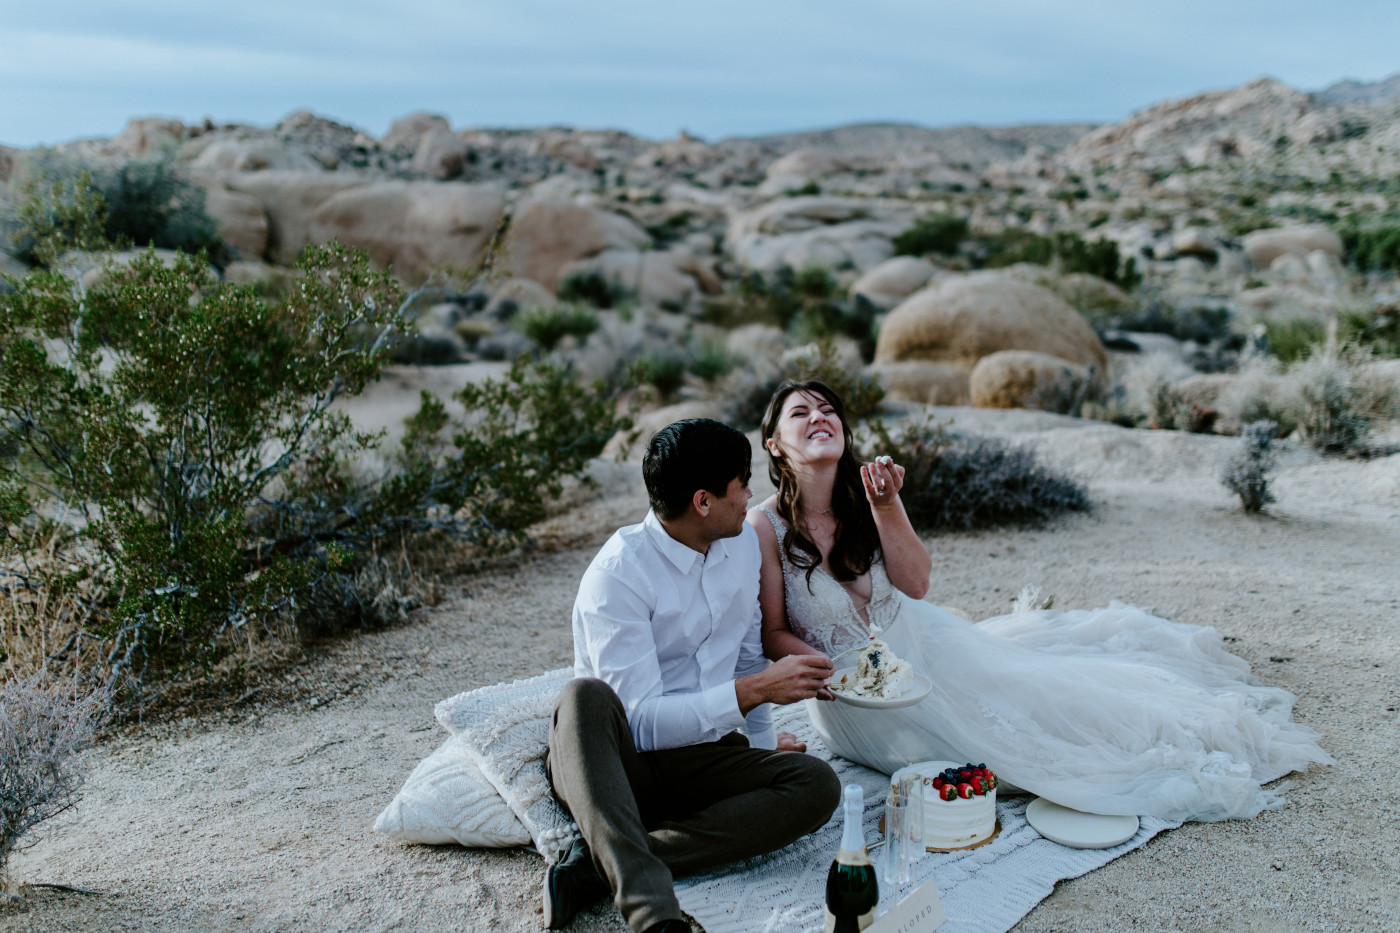 Shelby and Zack enjoy their cake while sitting in Joshua Tree.